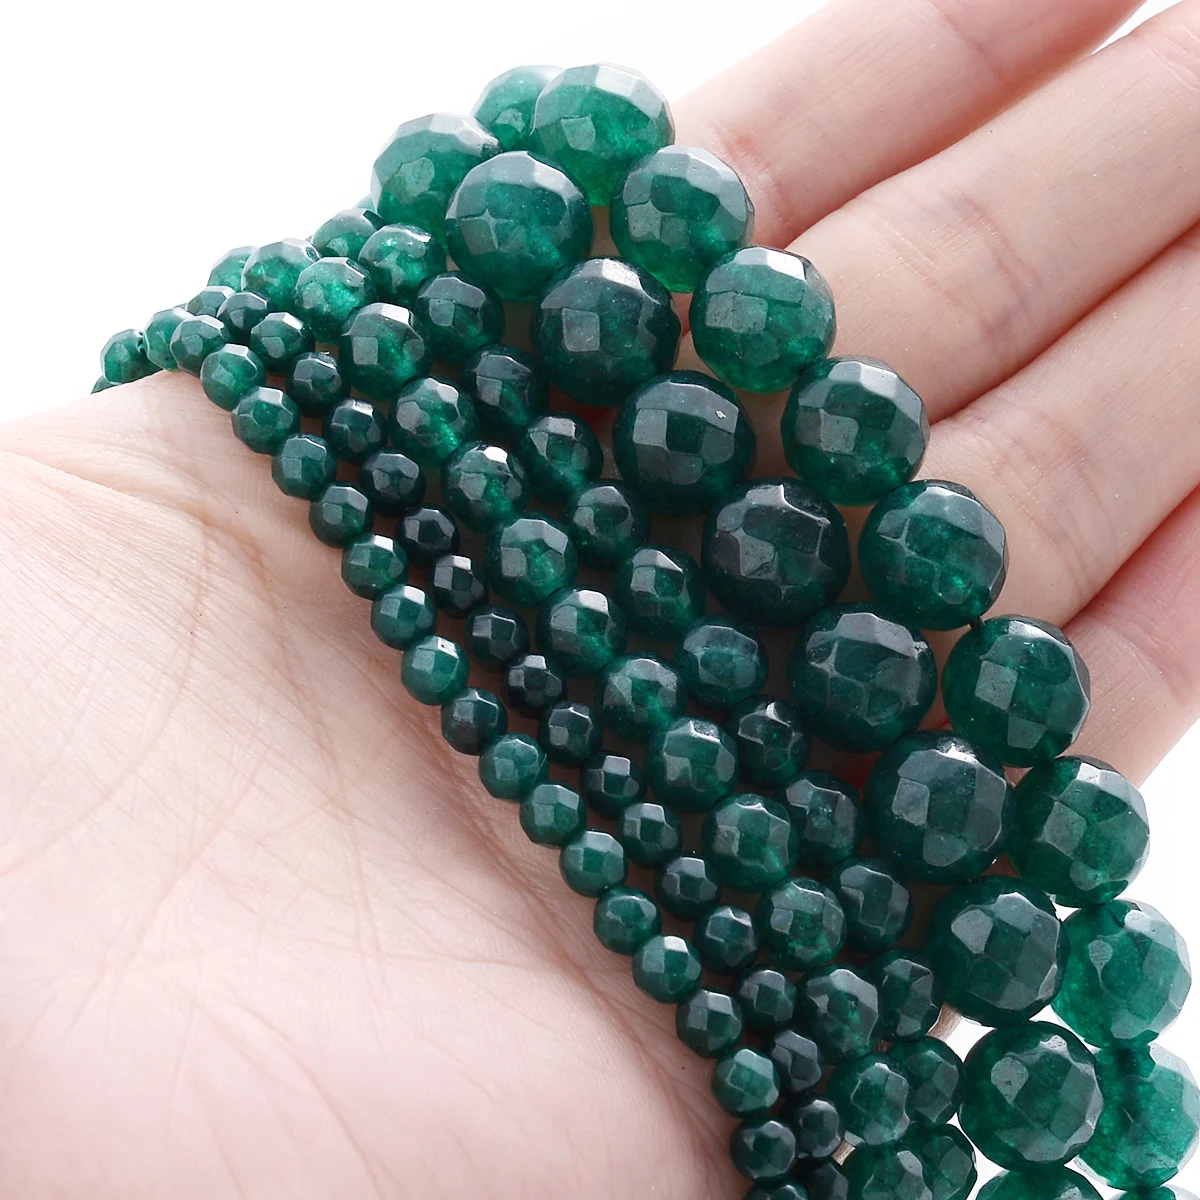 Natural Faceted Green Treasure Emeralds Chalcedony Jades Stone Loose Beads For Jewelry Making DIY Charm Necklace Bracelet